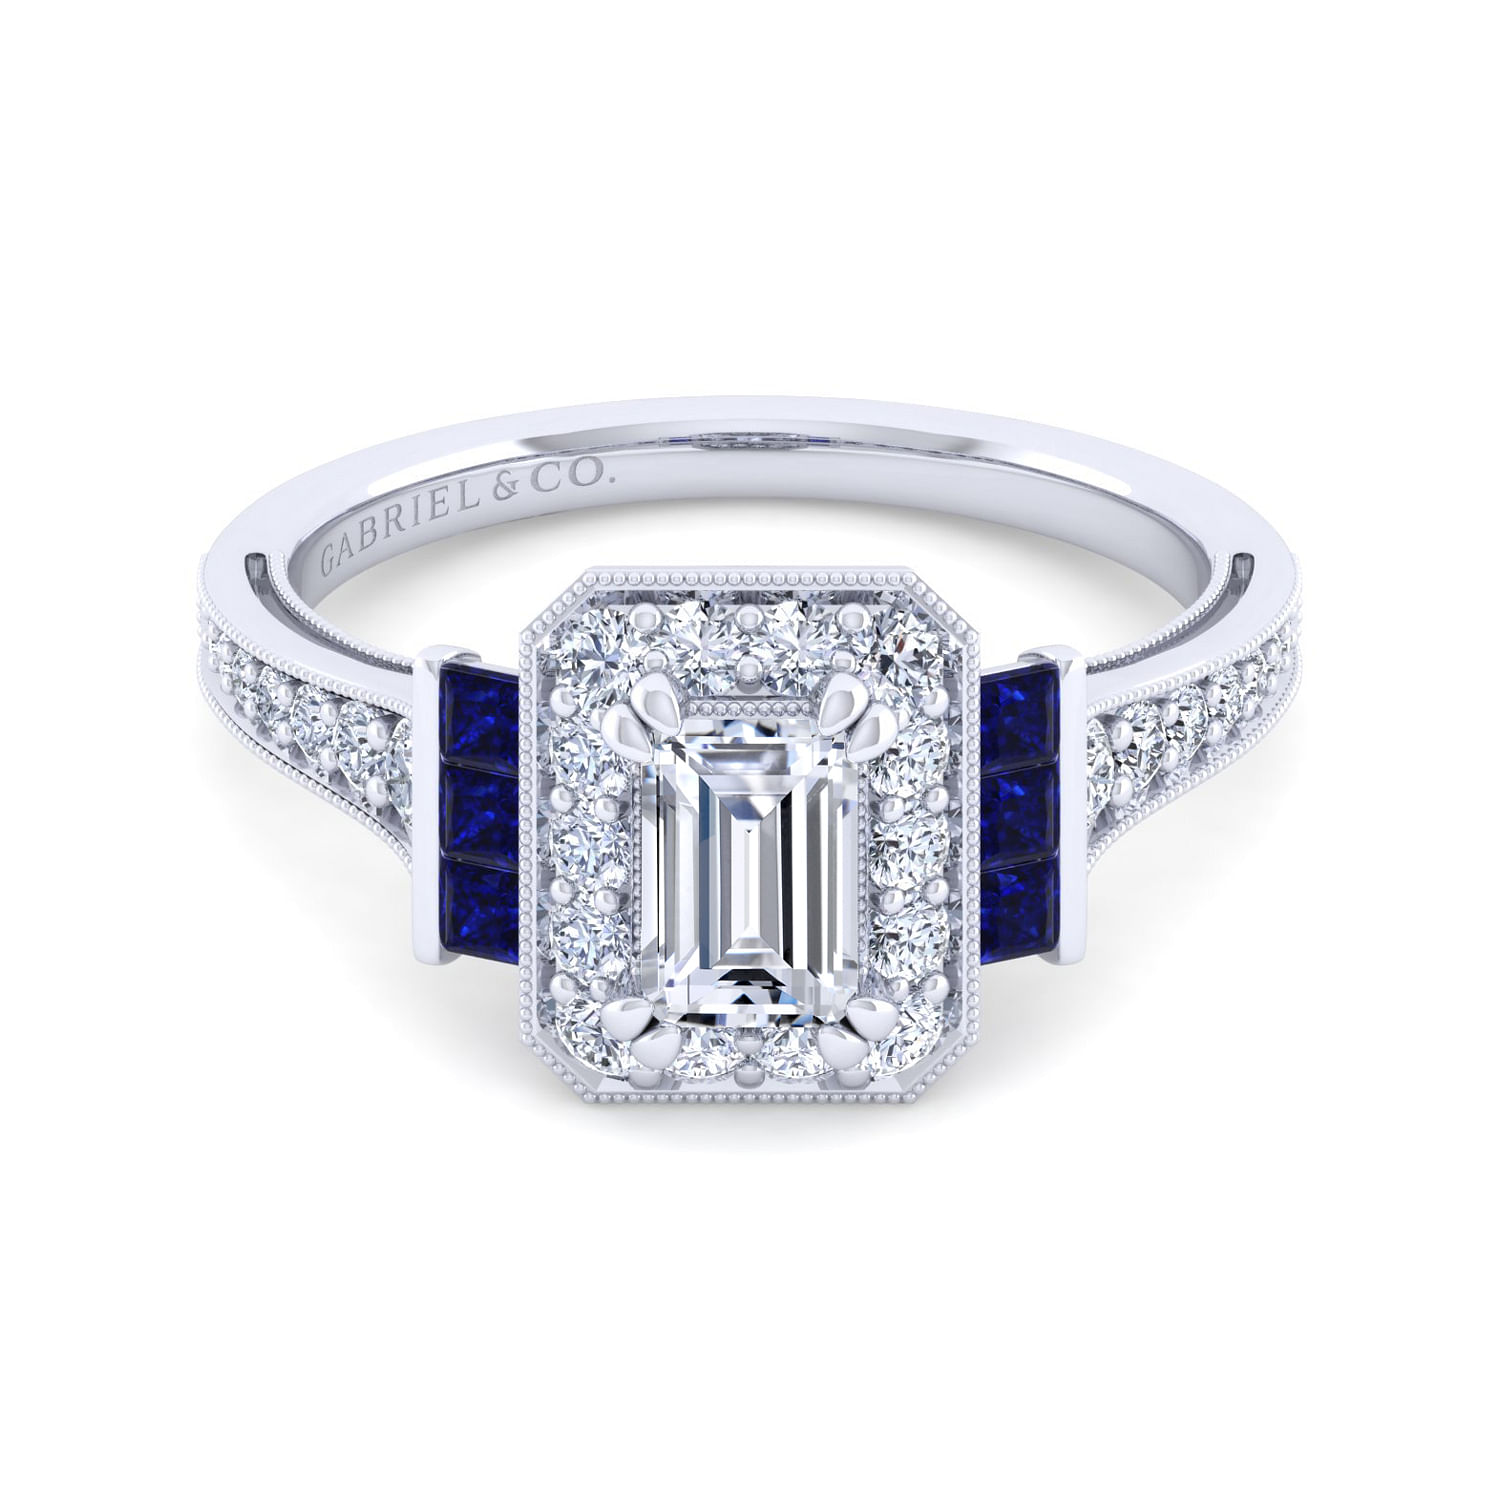 Vintage Inspired 14K White Gold Halo Emerald Cut Sapphire and Diamond Engagement Ring